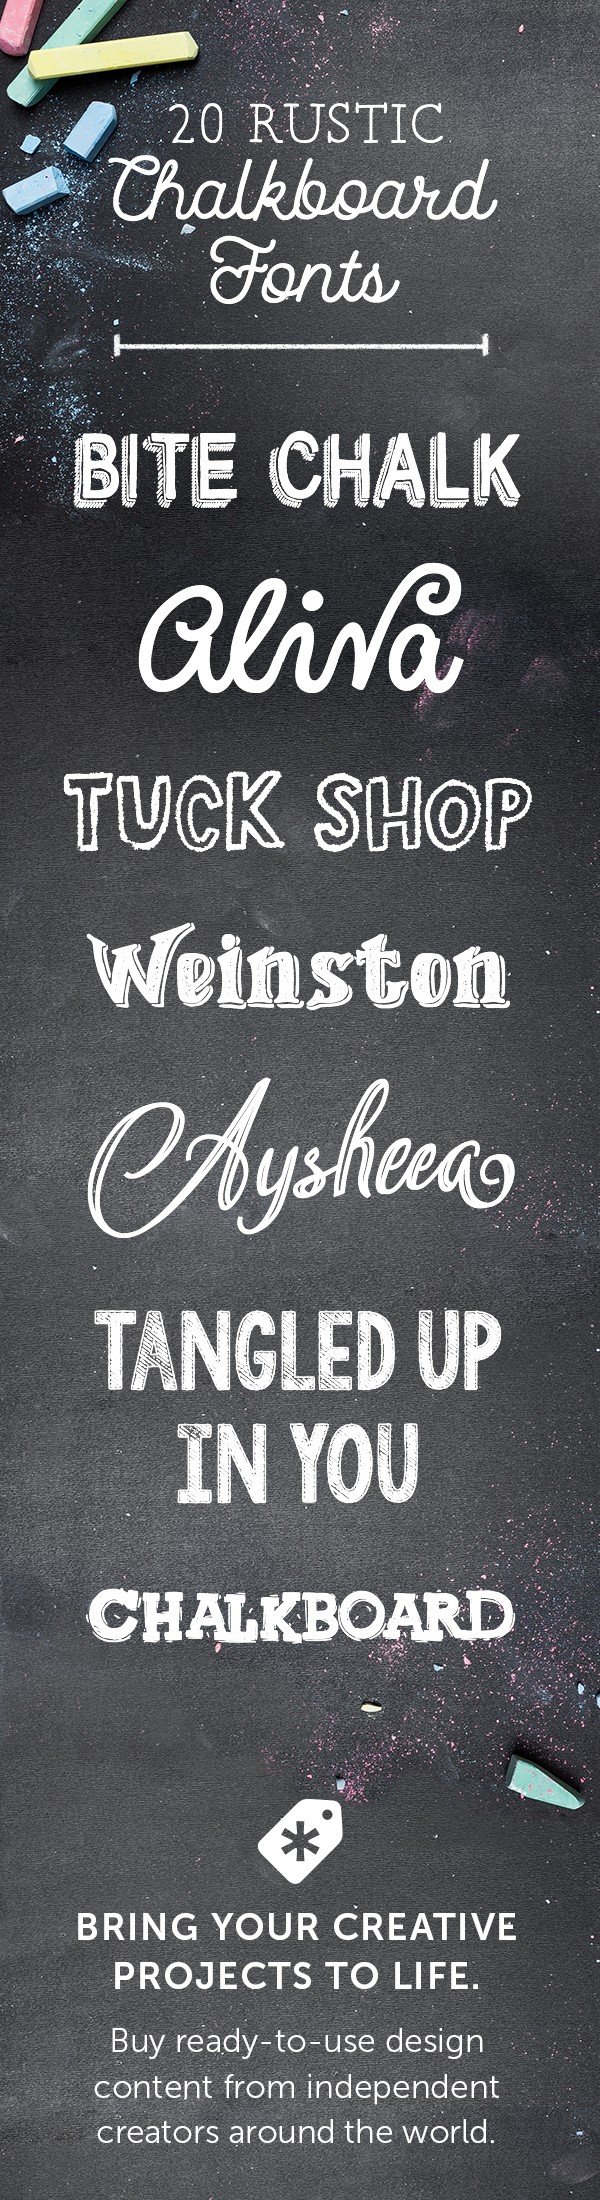 20 Rustic Chalkboard Fonts To Add Your Collection Creative Sign